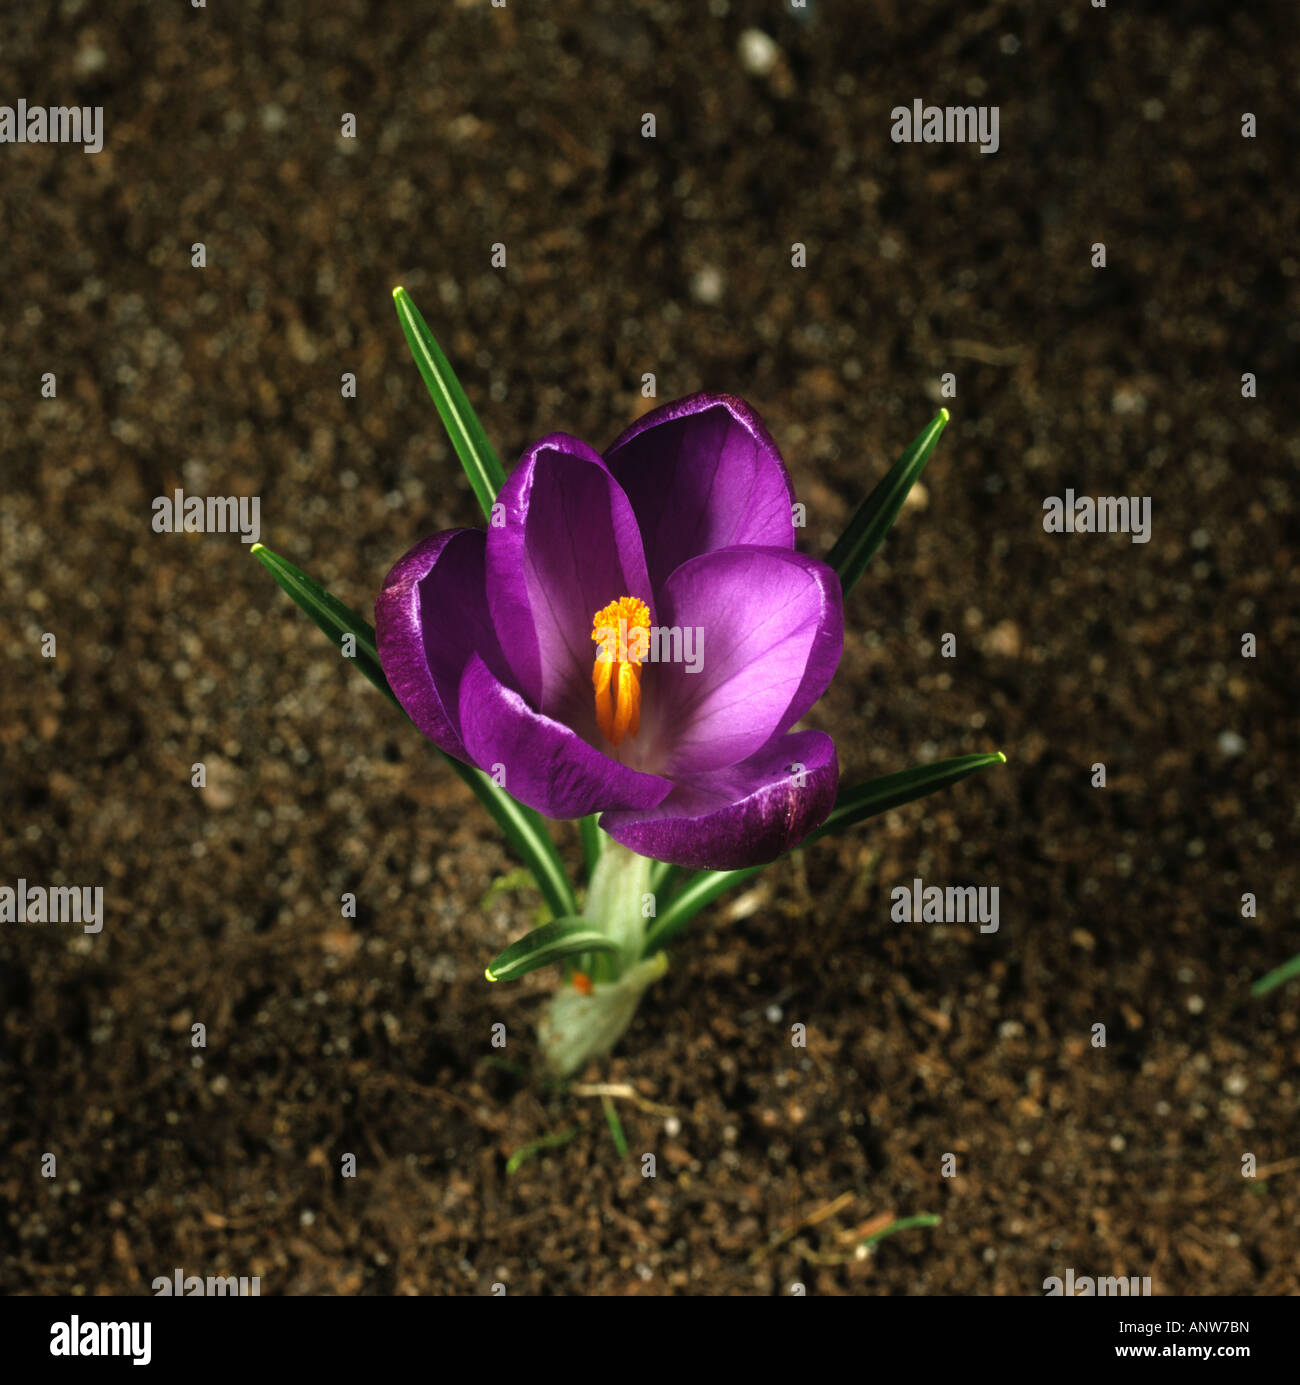 Third in a series of photographs showing the opening of a crocus flower Stock Photo